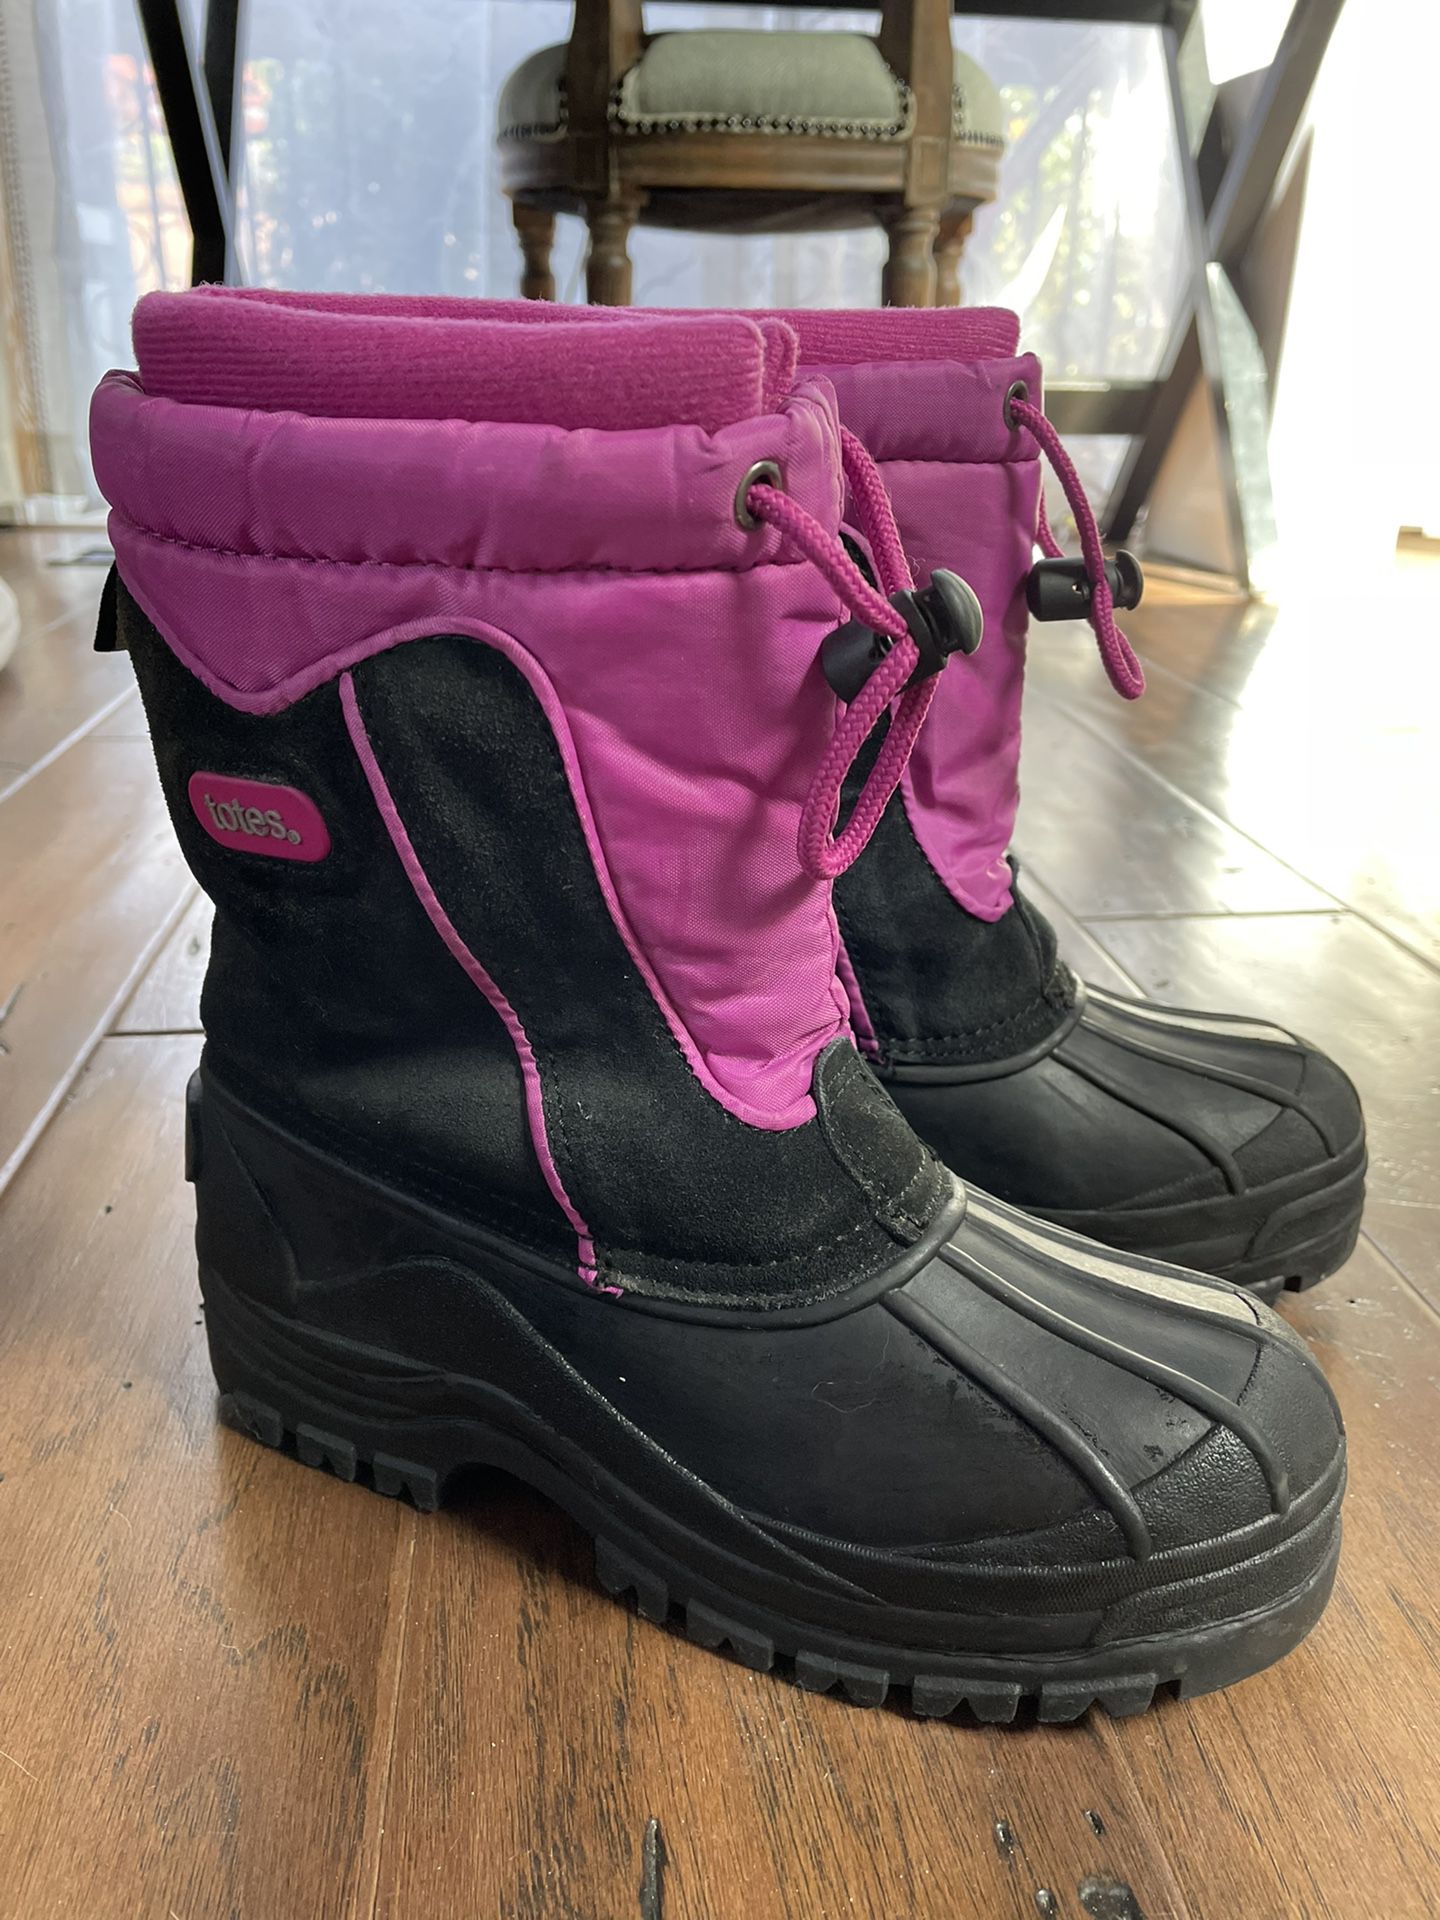 Girls Insulated Snow Boots - Size 3